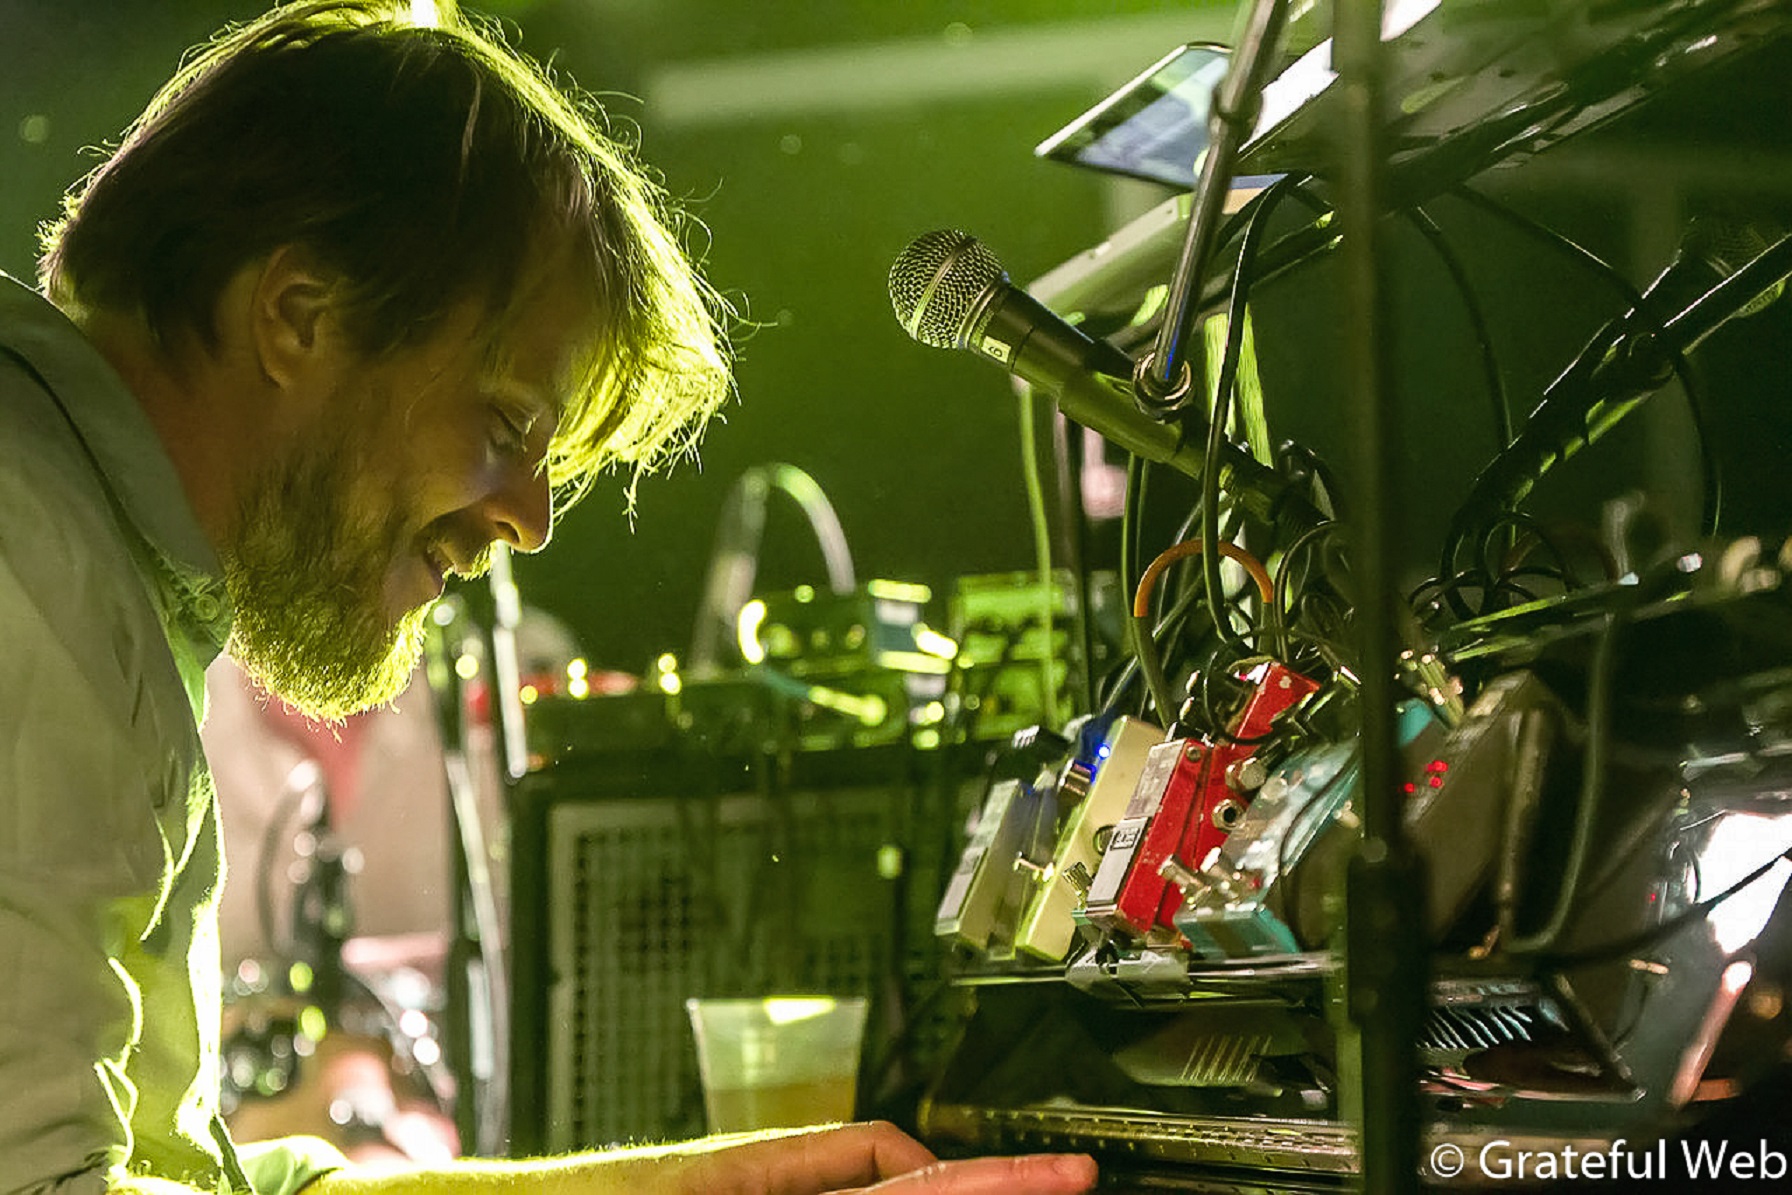 Grateful Web Interview with Marco Benevento